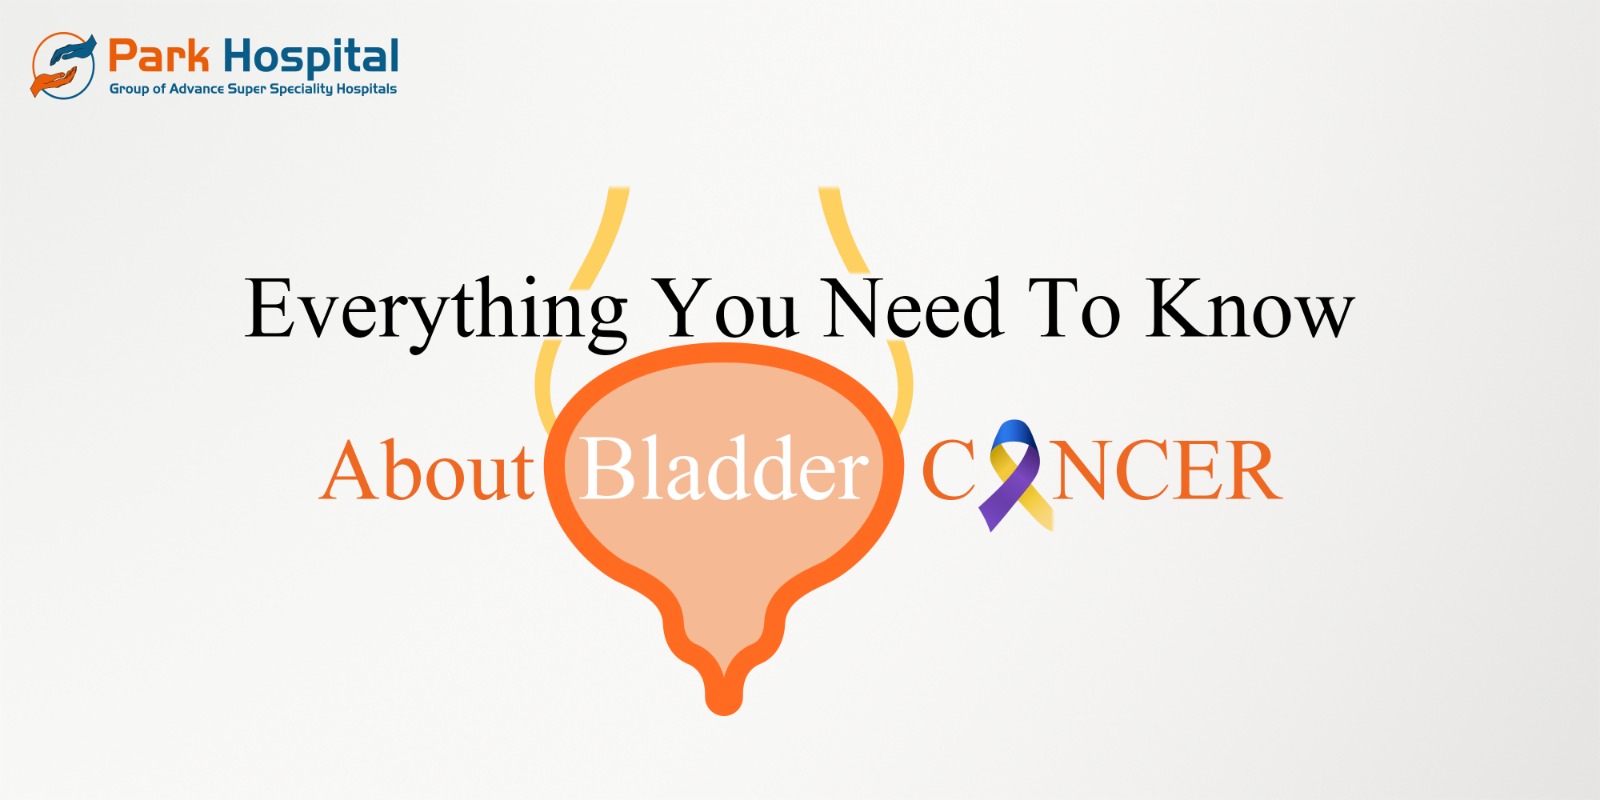 Everything You Need To Know About Bladder Cancer